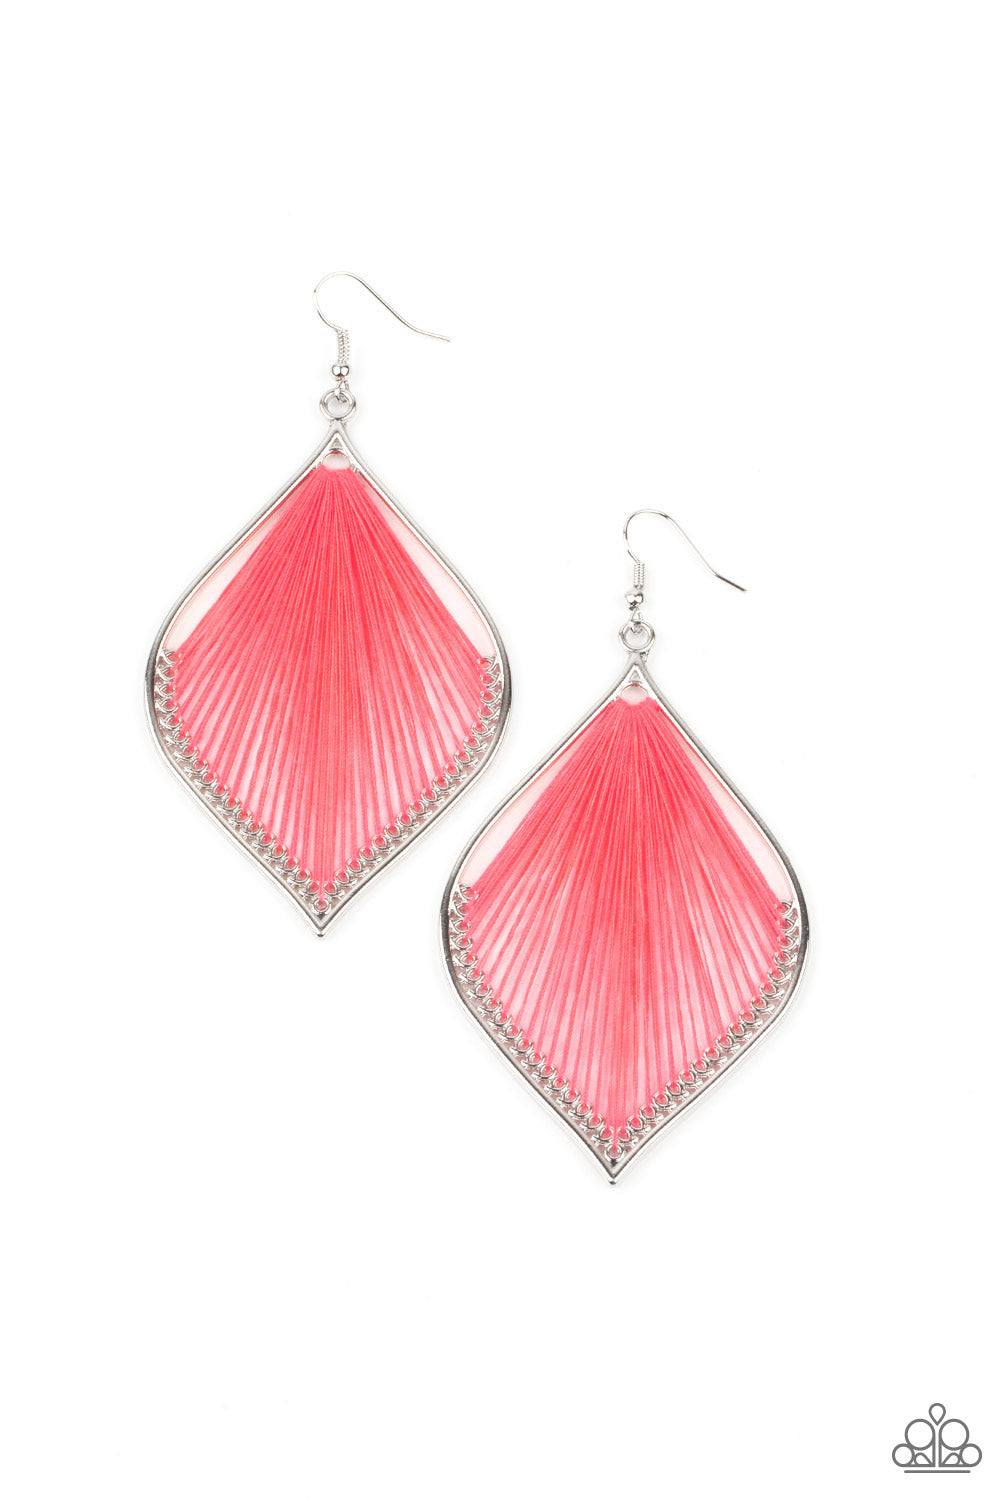 Earrings - String Theory - Pink